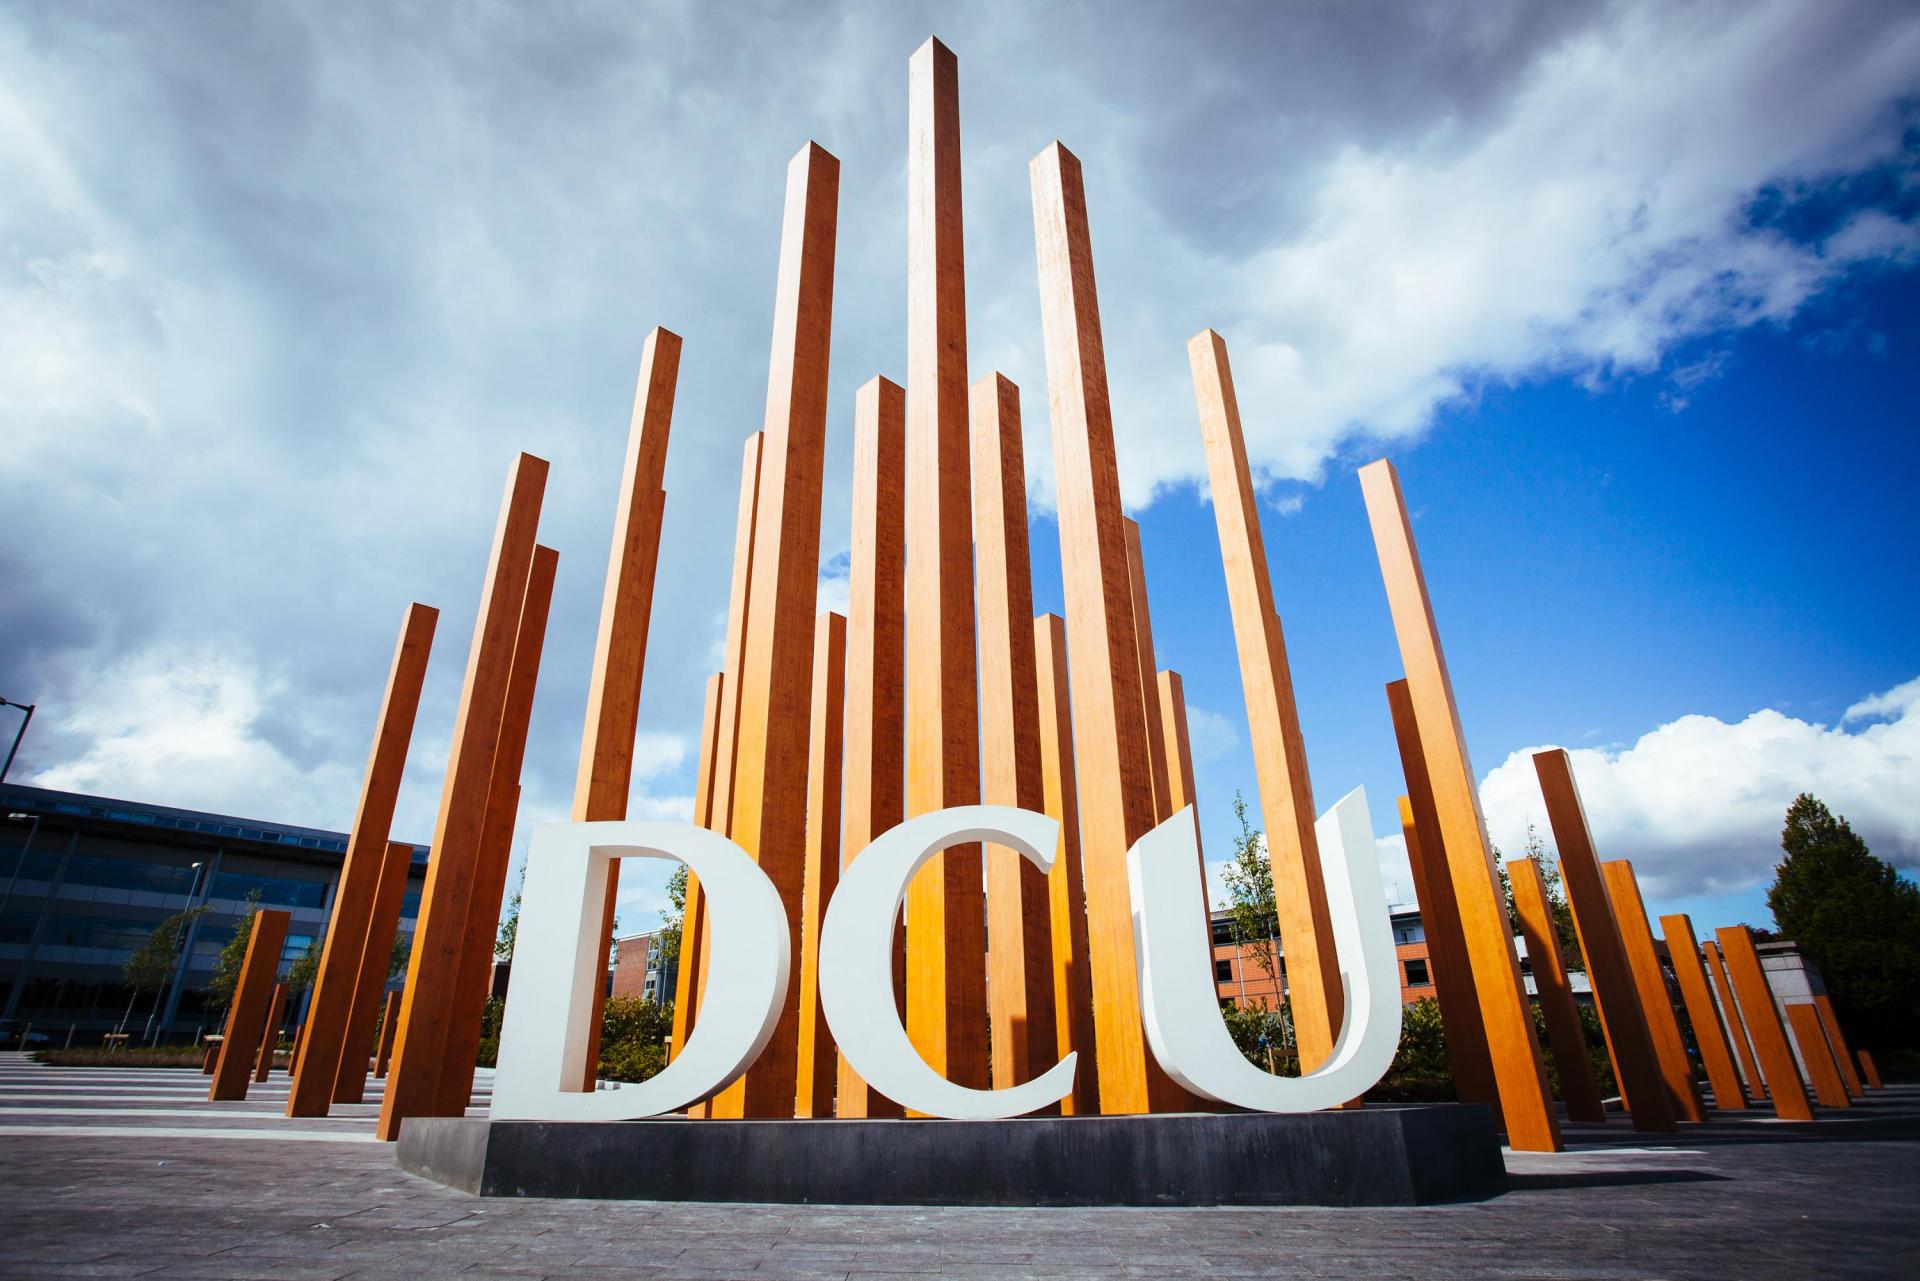 A photo of the DCU letters at the main entrance to the Glasnevin campus. Beams of orange wood are standing upright in the background.